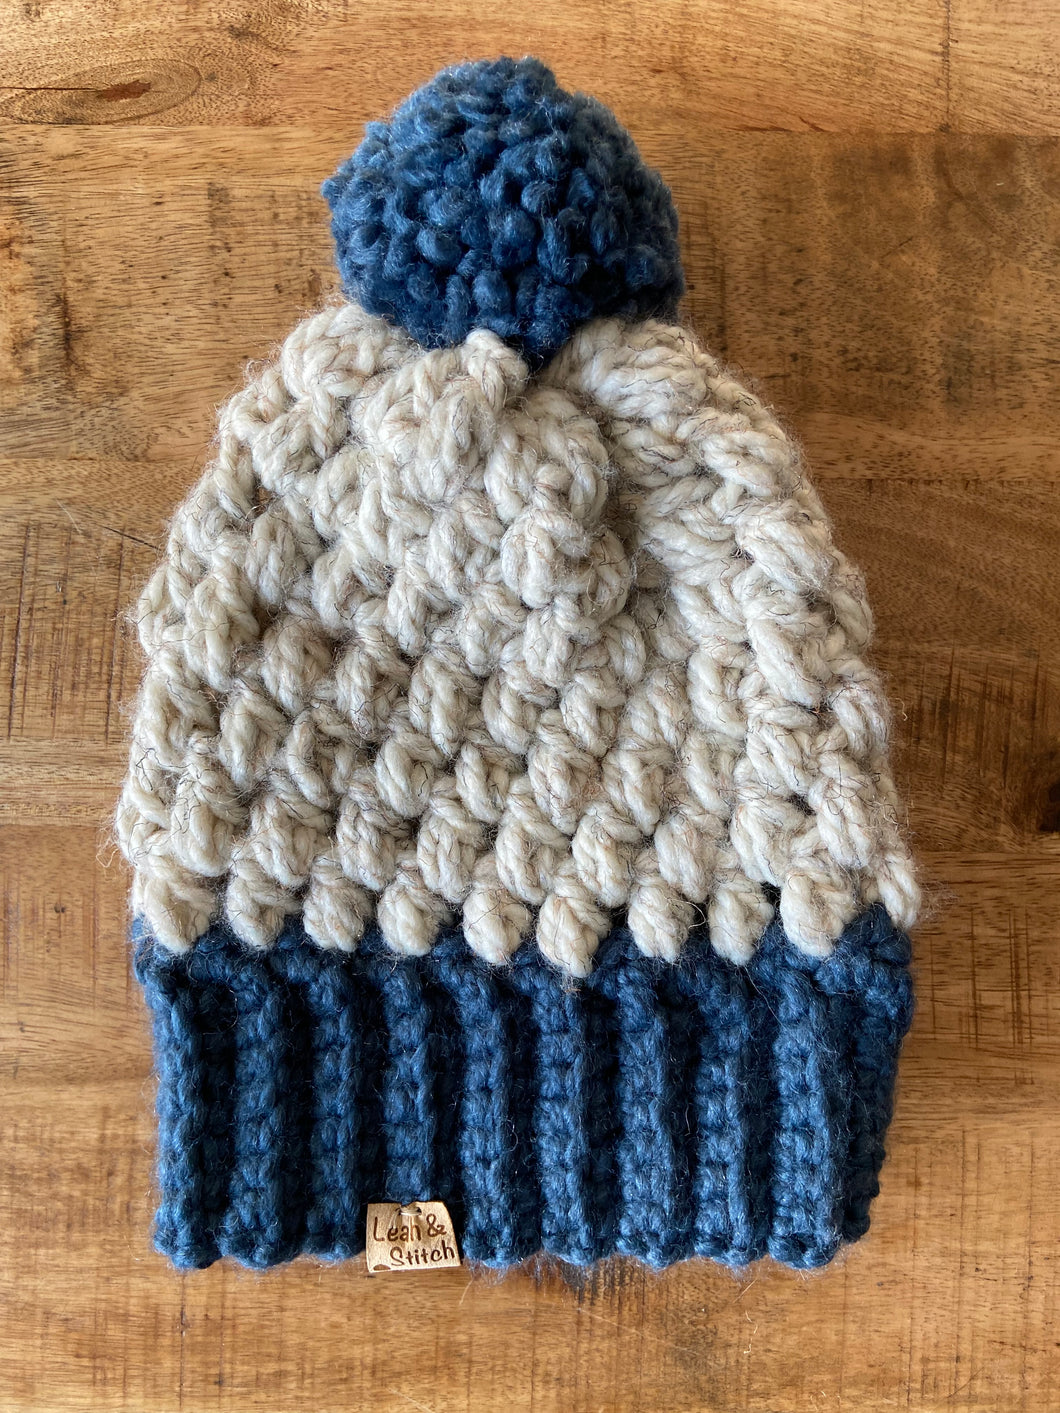 SALE ITEM: Denim and Wheat Two Toned Toque